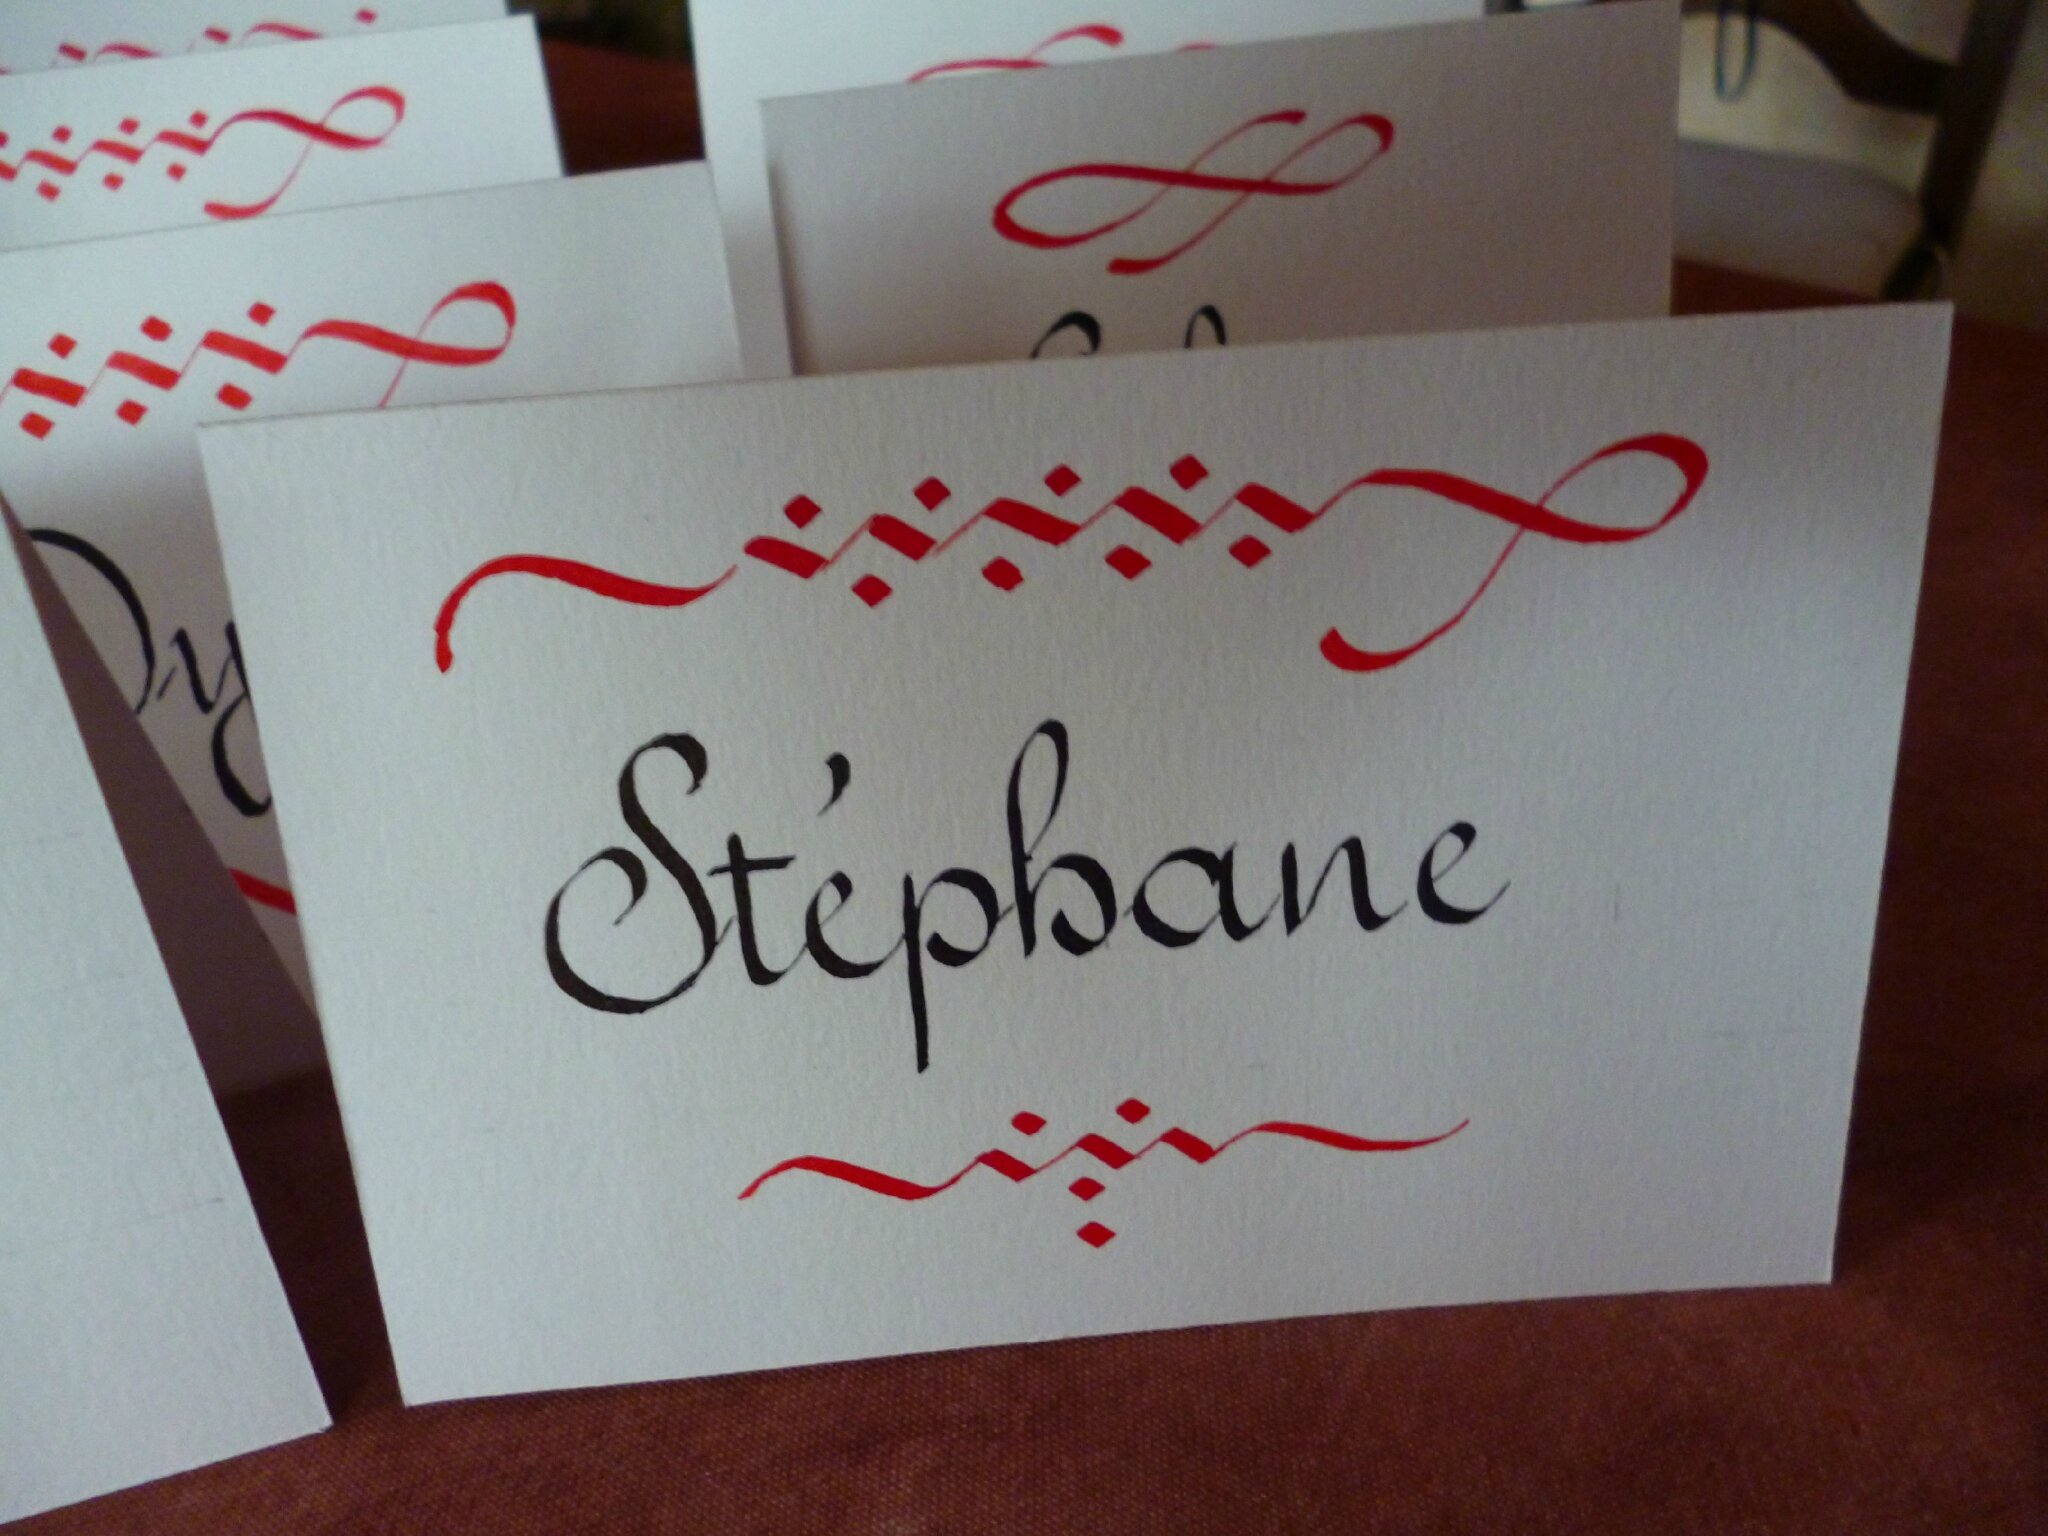 CALLIGRAPHIE LE GUIDE COMPLET